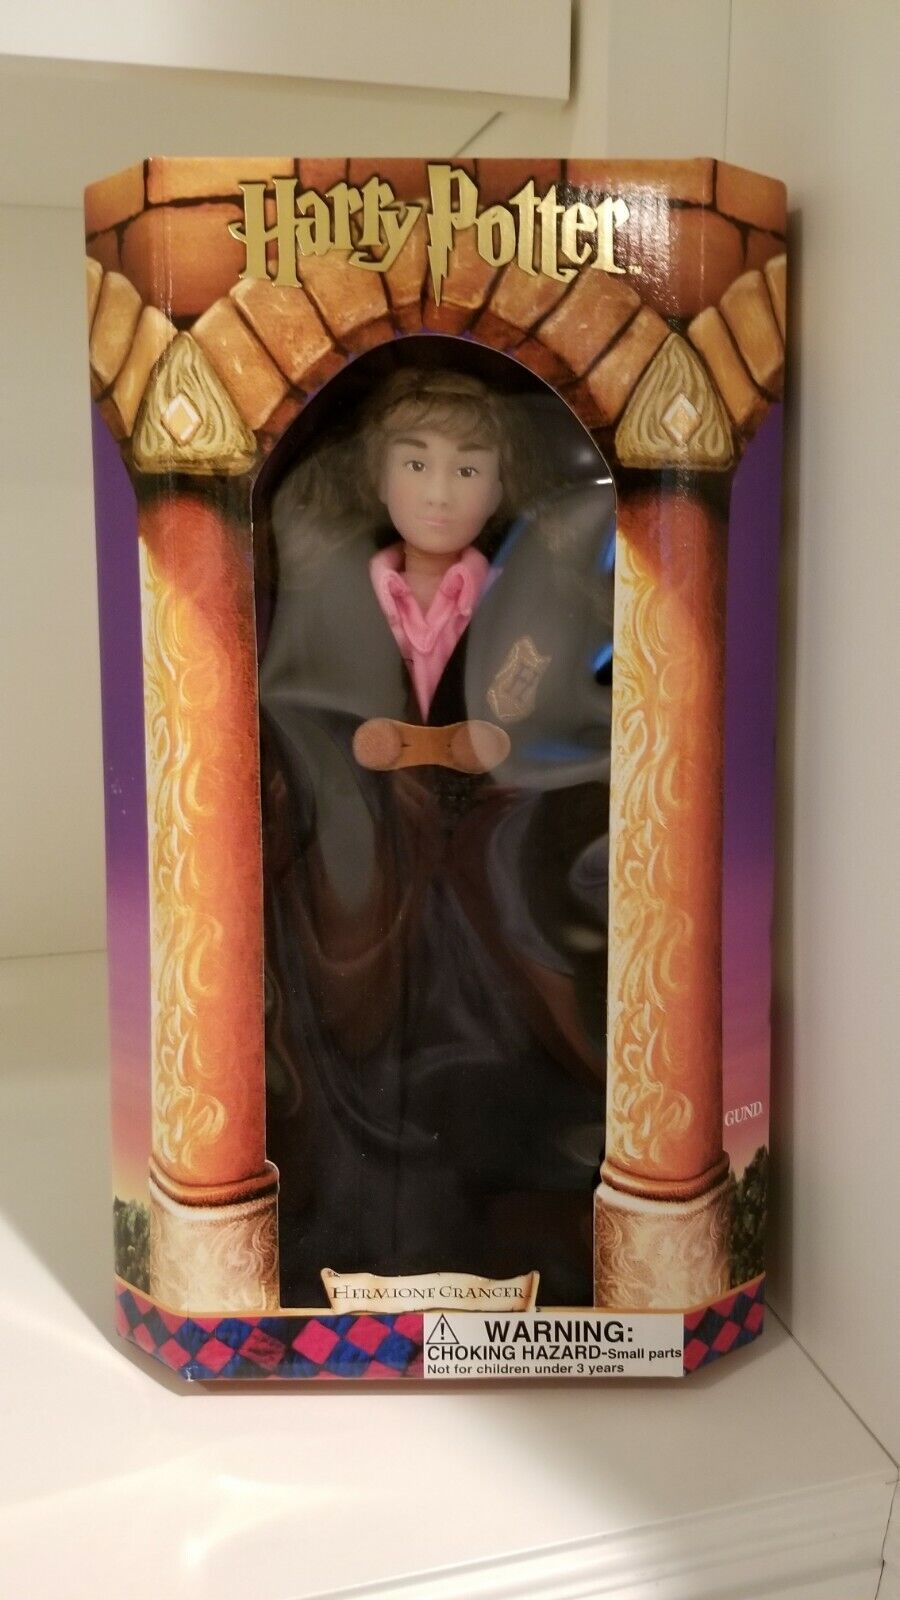 RARE Harry Potter Hermione Granger Doll by Gund SEALED CONDITION 75412